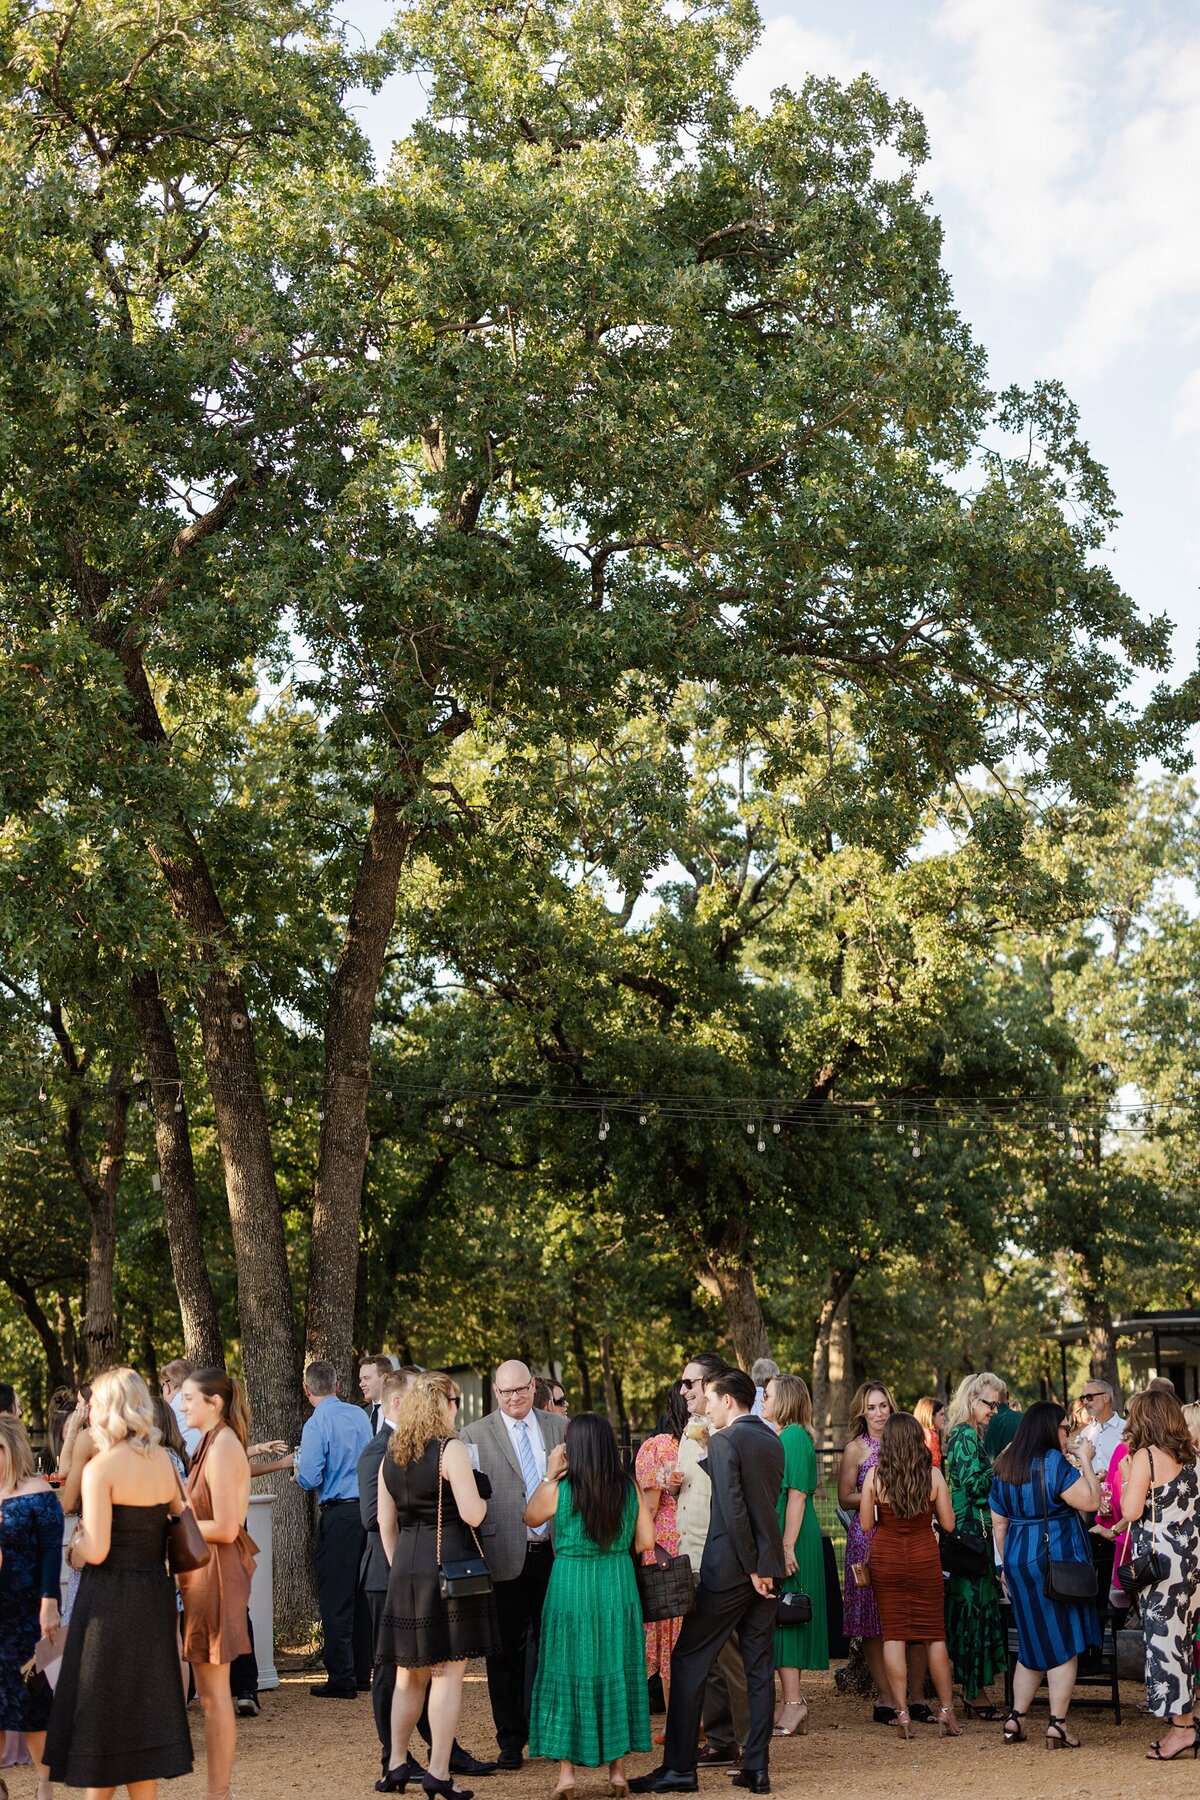 A candid shot of a cocktail hour right before the start of a wedding reception at Bella Cavalli Events in Aubrey, Texas. Many guests can be seen mingling and drinking in small groups while the whole scene is backed by multiple, large trees.